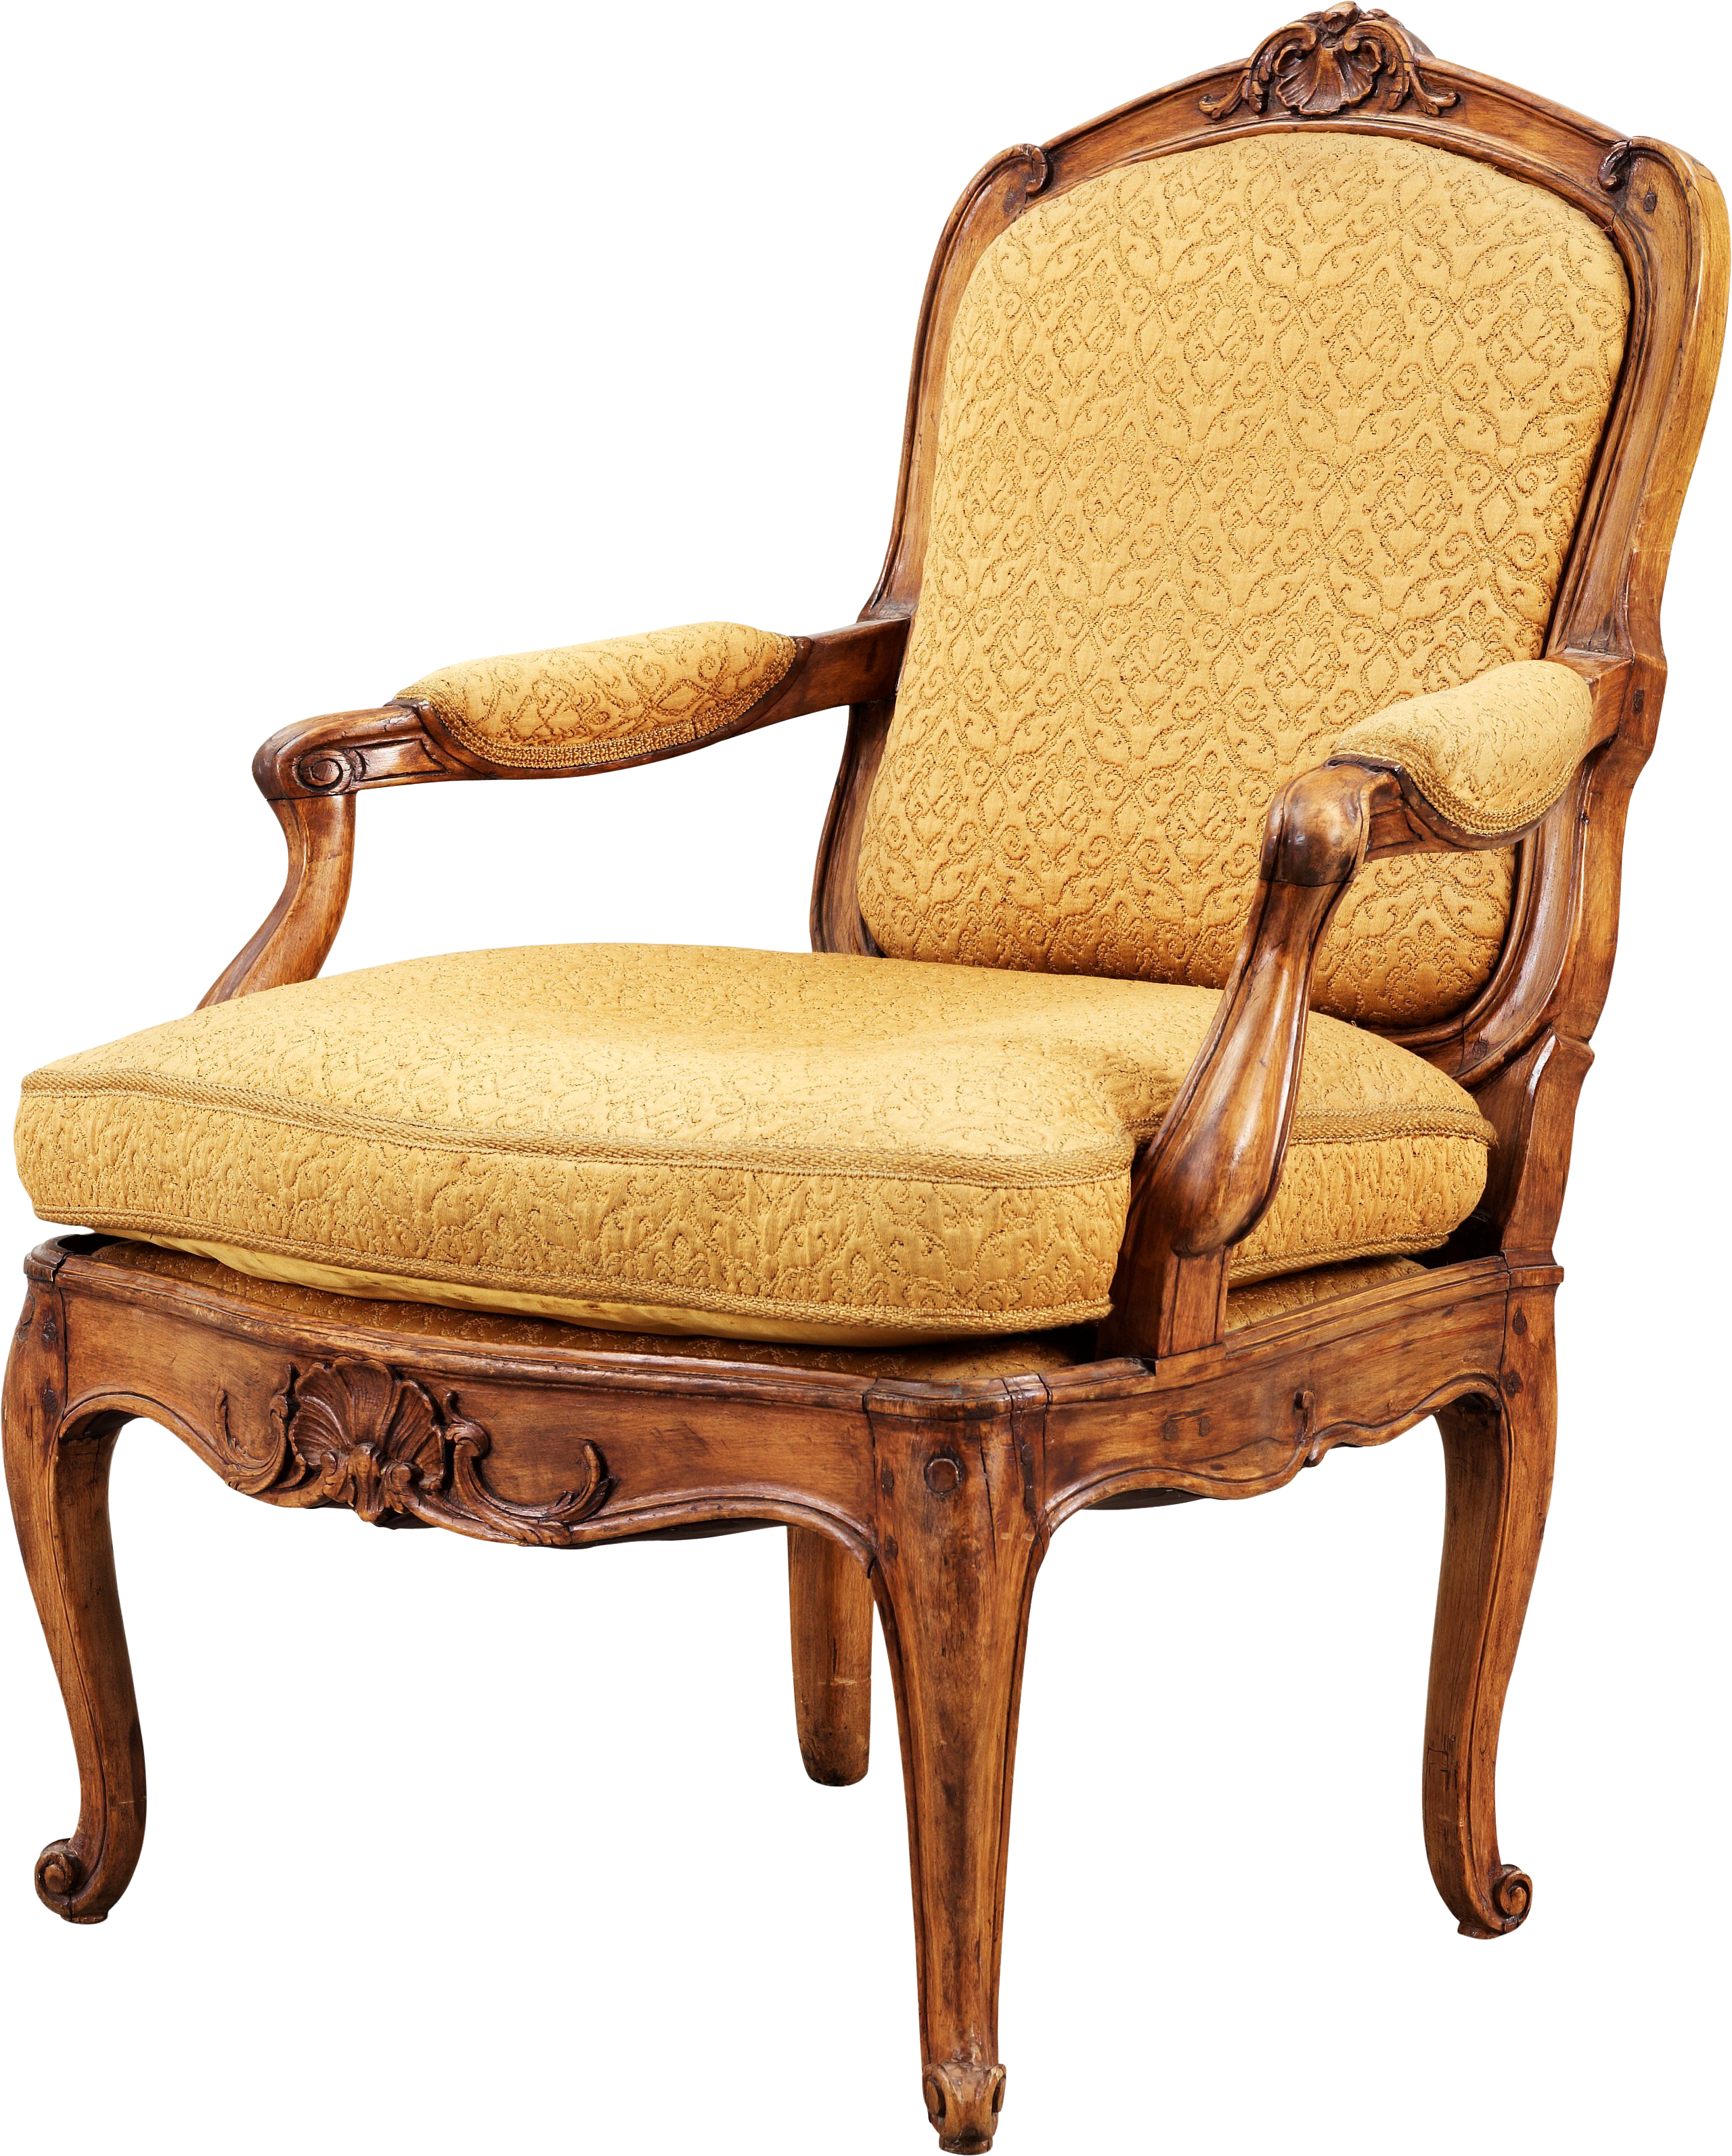 Antique Chair Download HQ PNG Image